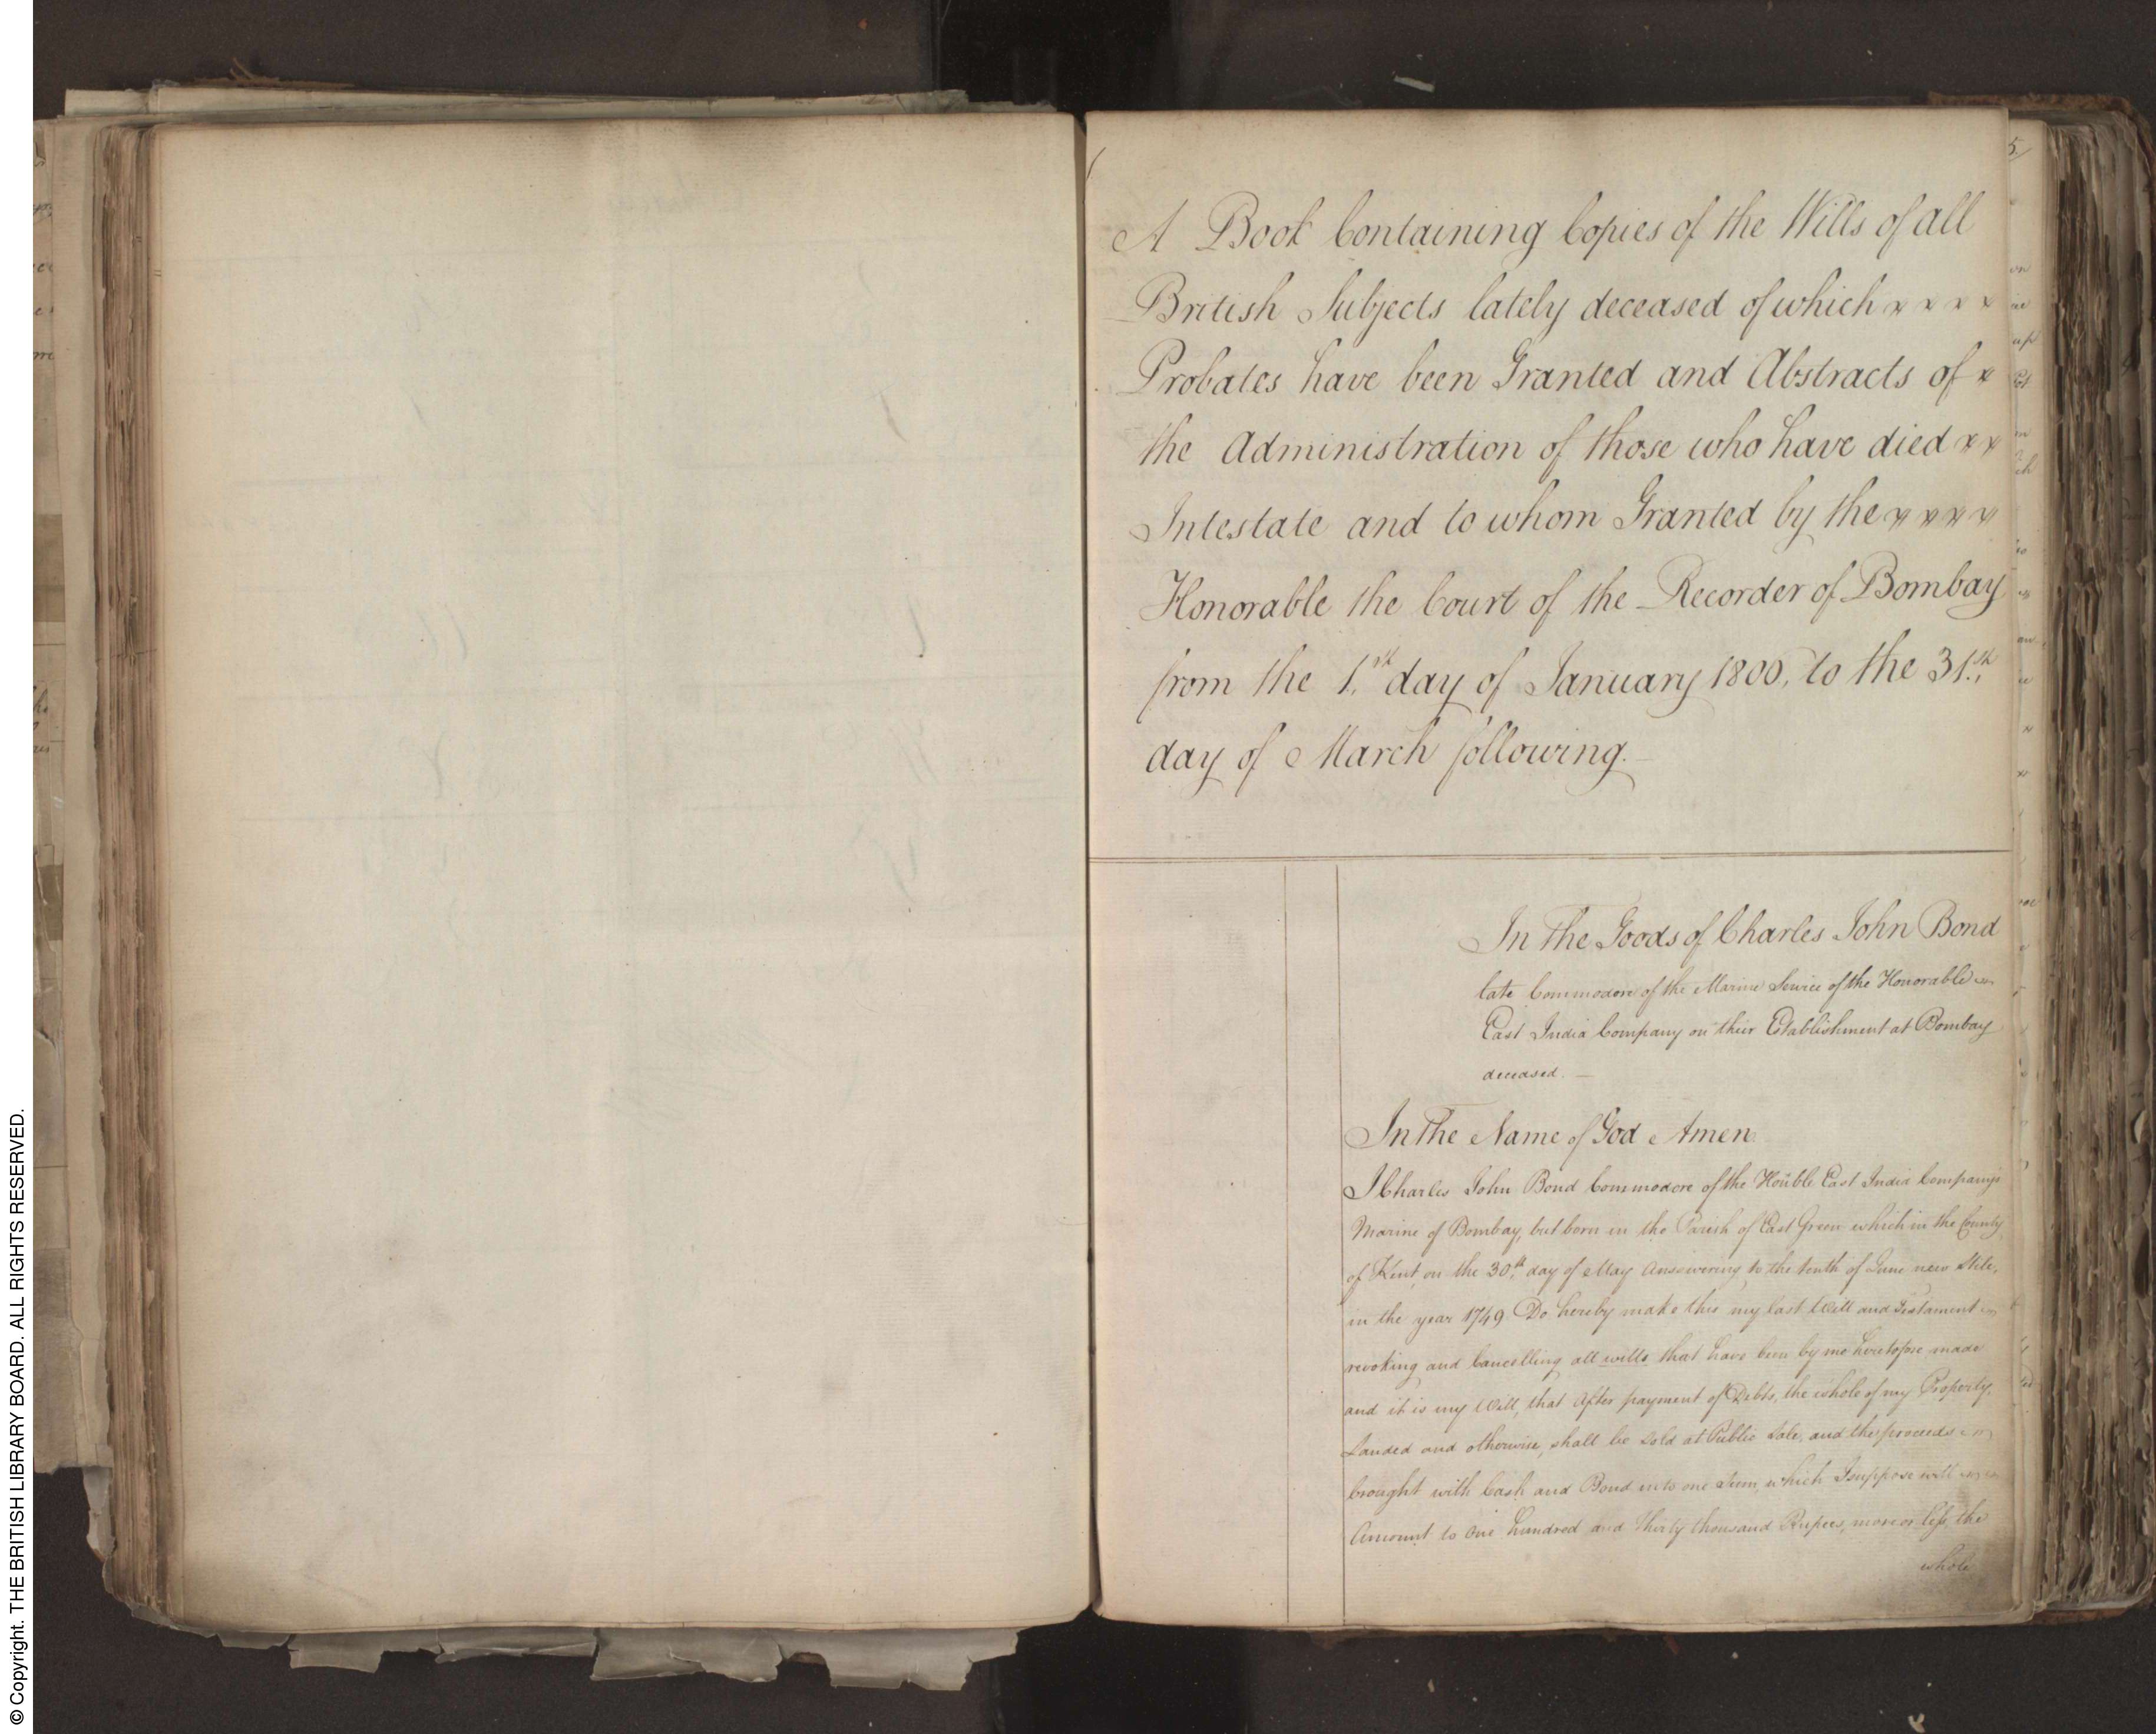 Will of Commodore Charles John Bond of the Honble East India Company in 1803 with codicils in 1804 and 1806